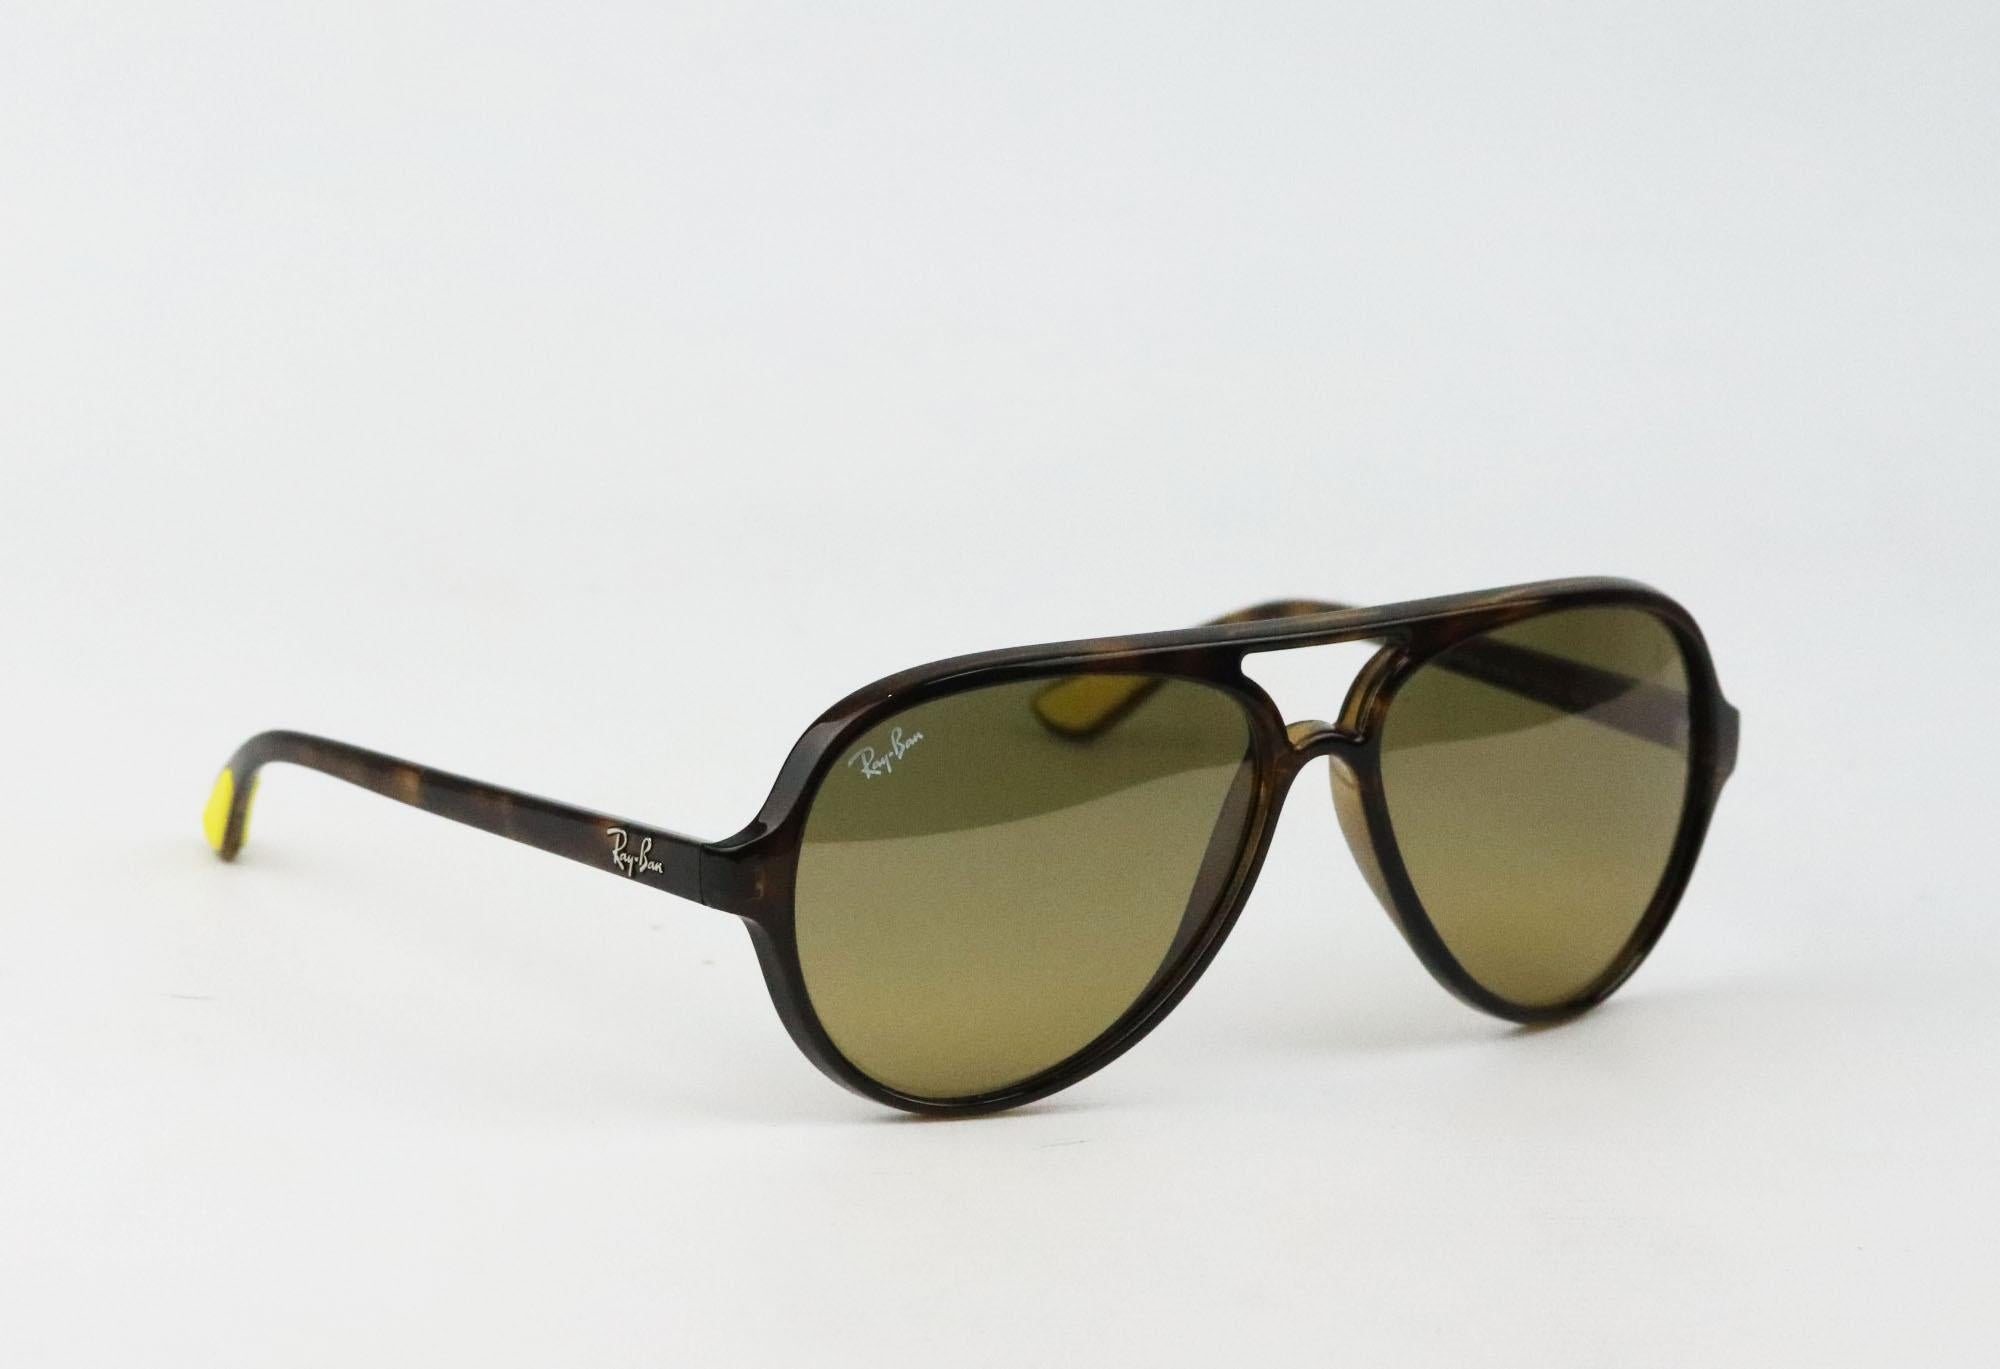 These sunglasses by Ray-Ban + Scuderia Ferrari are detailed with the brand's yellow rubber logo on the arms, they've been made in Italy from glossy tortoiseshell acetate with oversized frames that'll suit everyone.
Comes with case.
Style code: